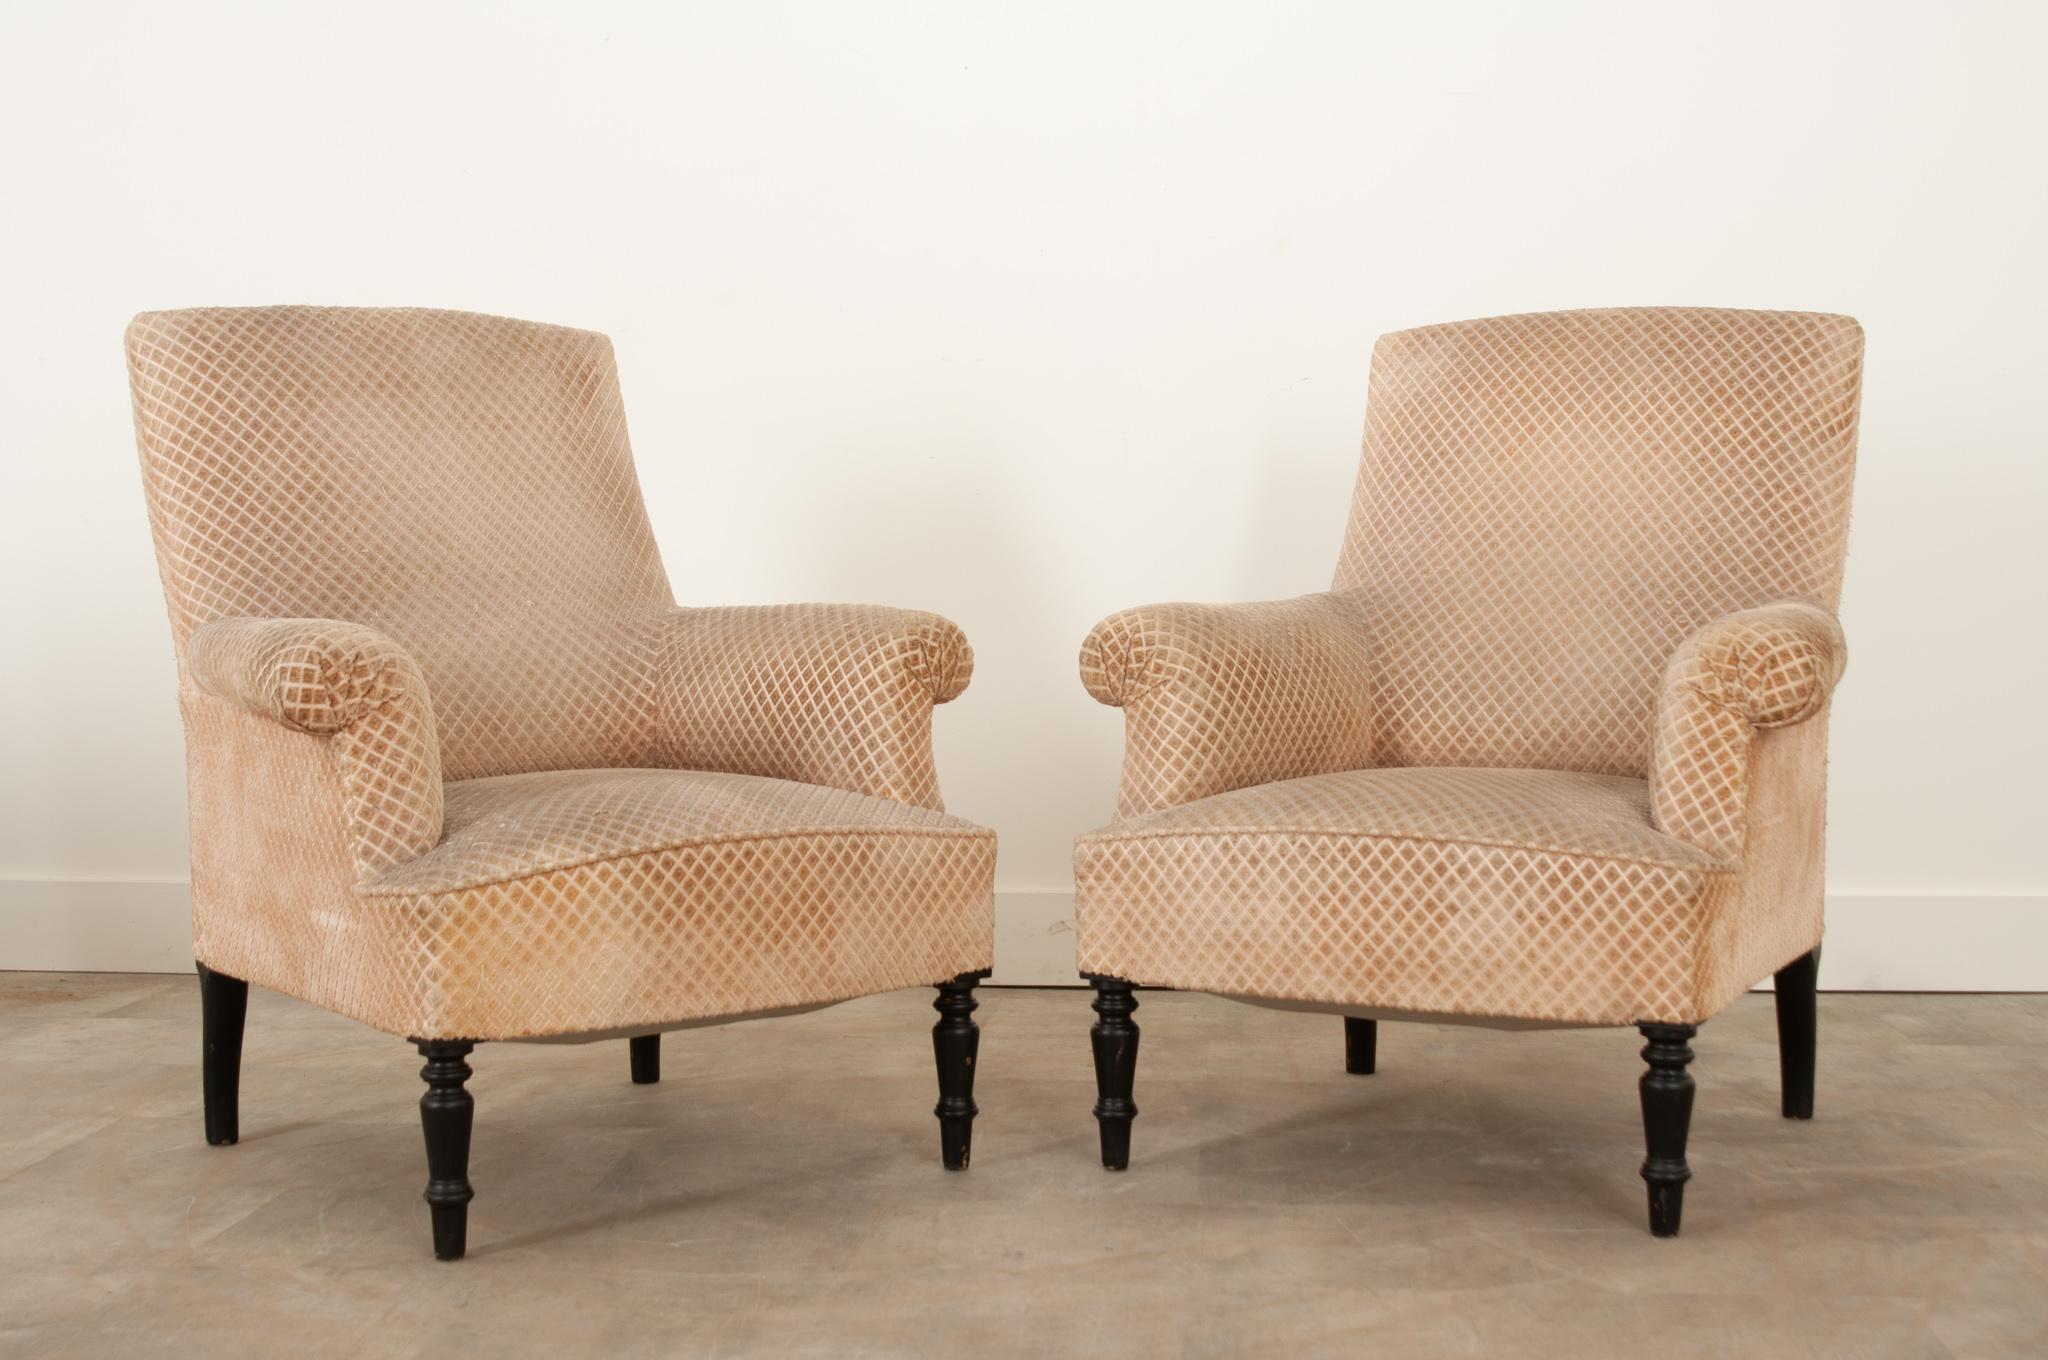 A classic pair of armchairs from 19th century England in wonderful antique condition. Upholstered in a neutral, patterned cut velvet fabric. Comfortable and sturdy, the chairs are raised on turned ebonized legs in the front, more simple legs in the